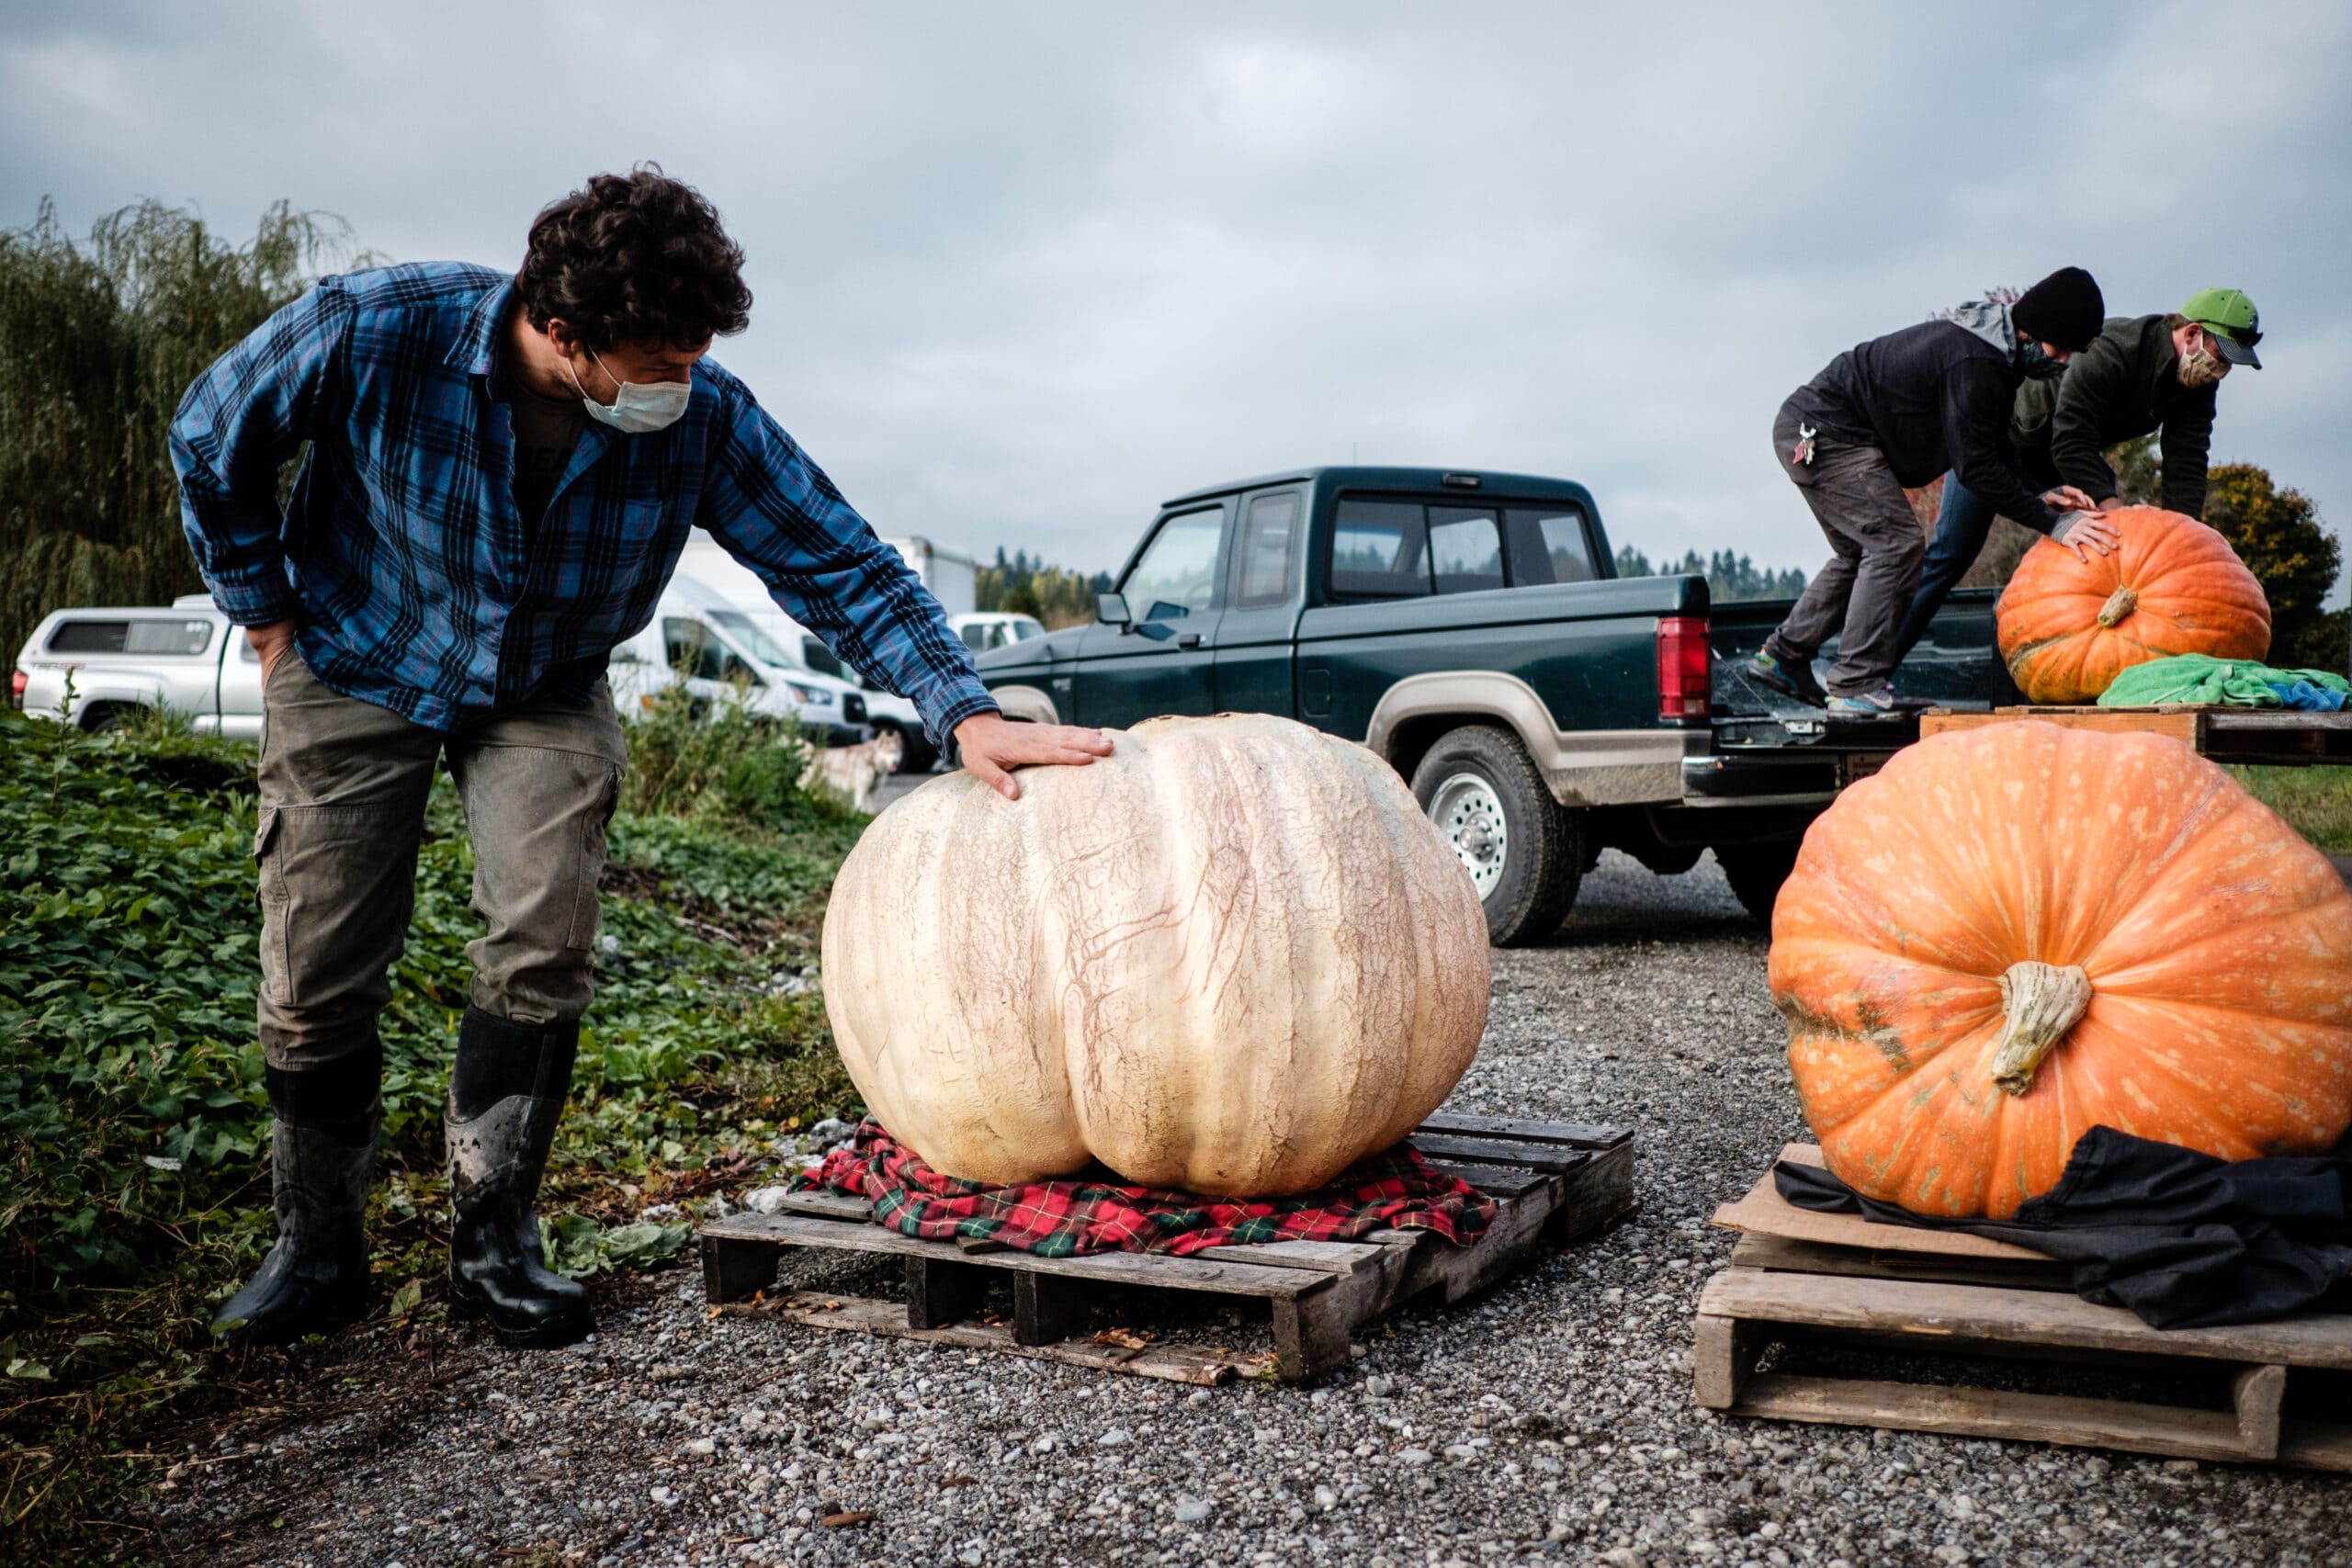 Andrew of Viva Farms gently admiring his giant pumpkin from 2020